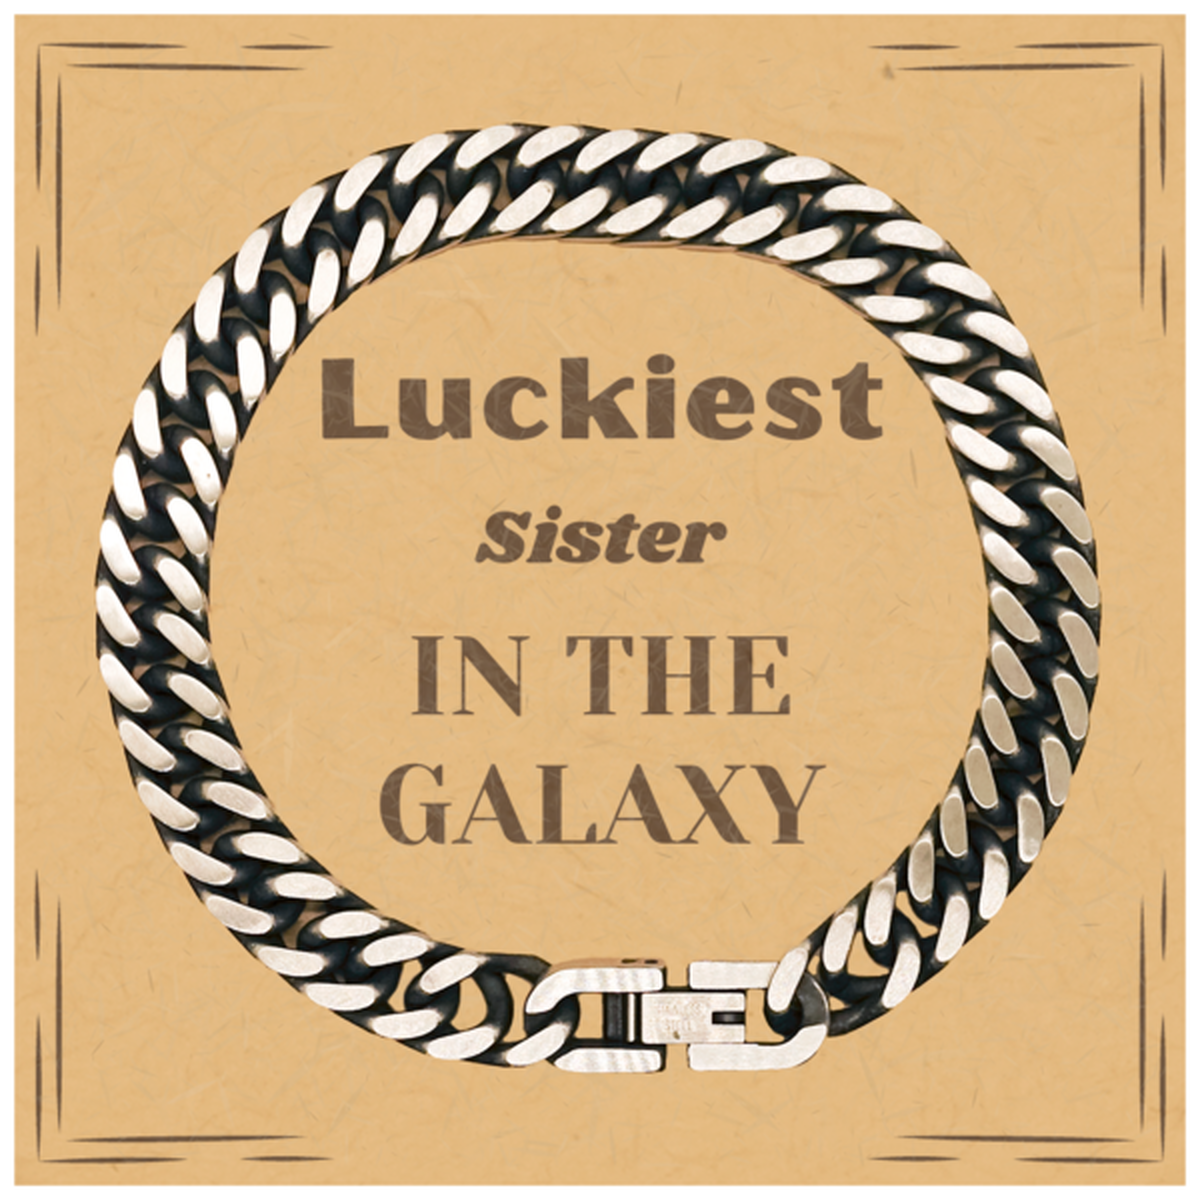 Luckiest Sister in the Galaxy, To My Sister Message Card Gifts, Christmas Sister Cuban Link Chain Bracelet Gifts, X-mas Birthday Unique Gifts For Sister Men Women